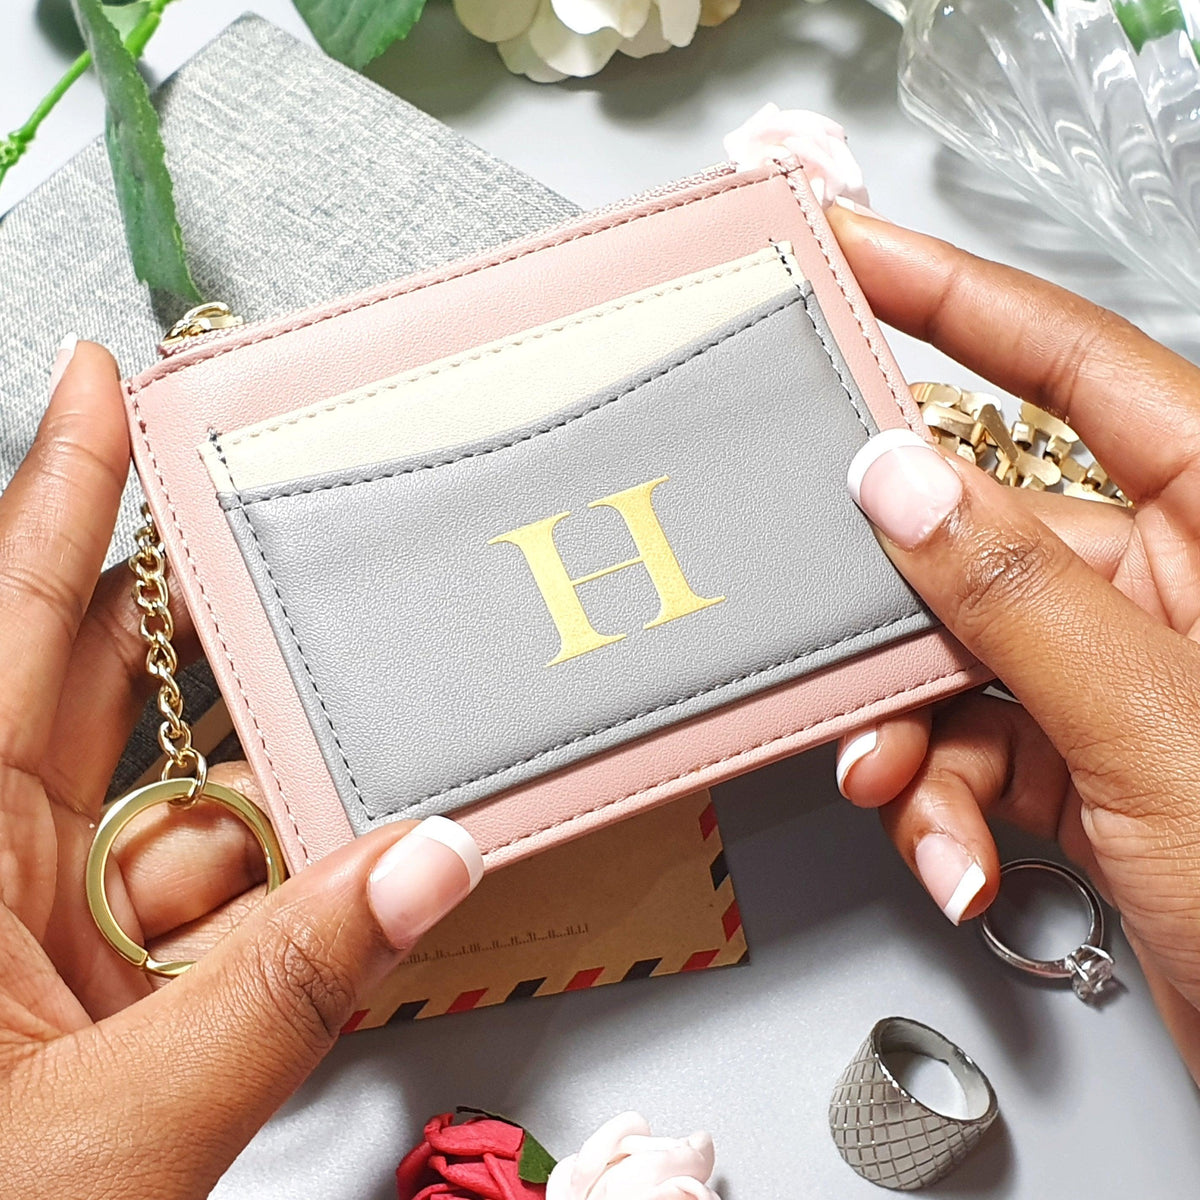 Personalised Custom Wallet for Women Clutch Bag Customized photo purse |  eBay